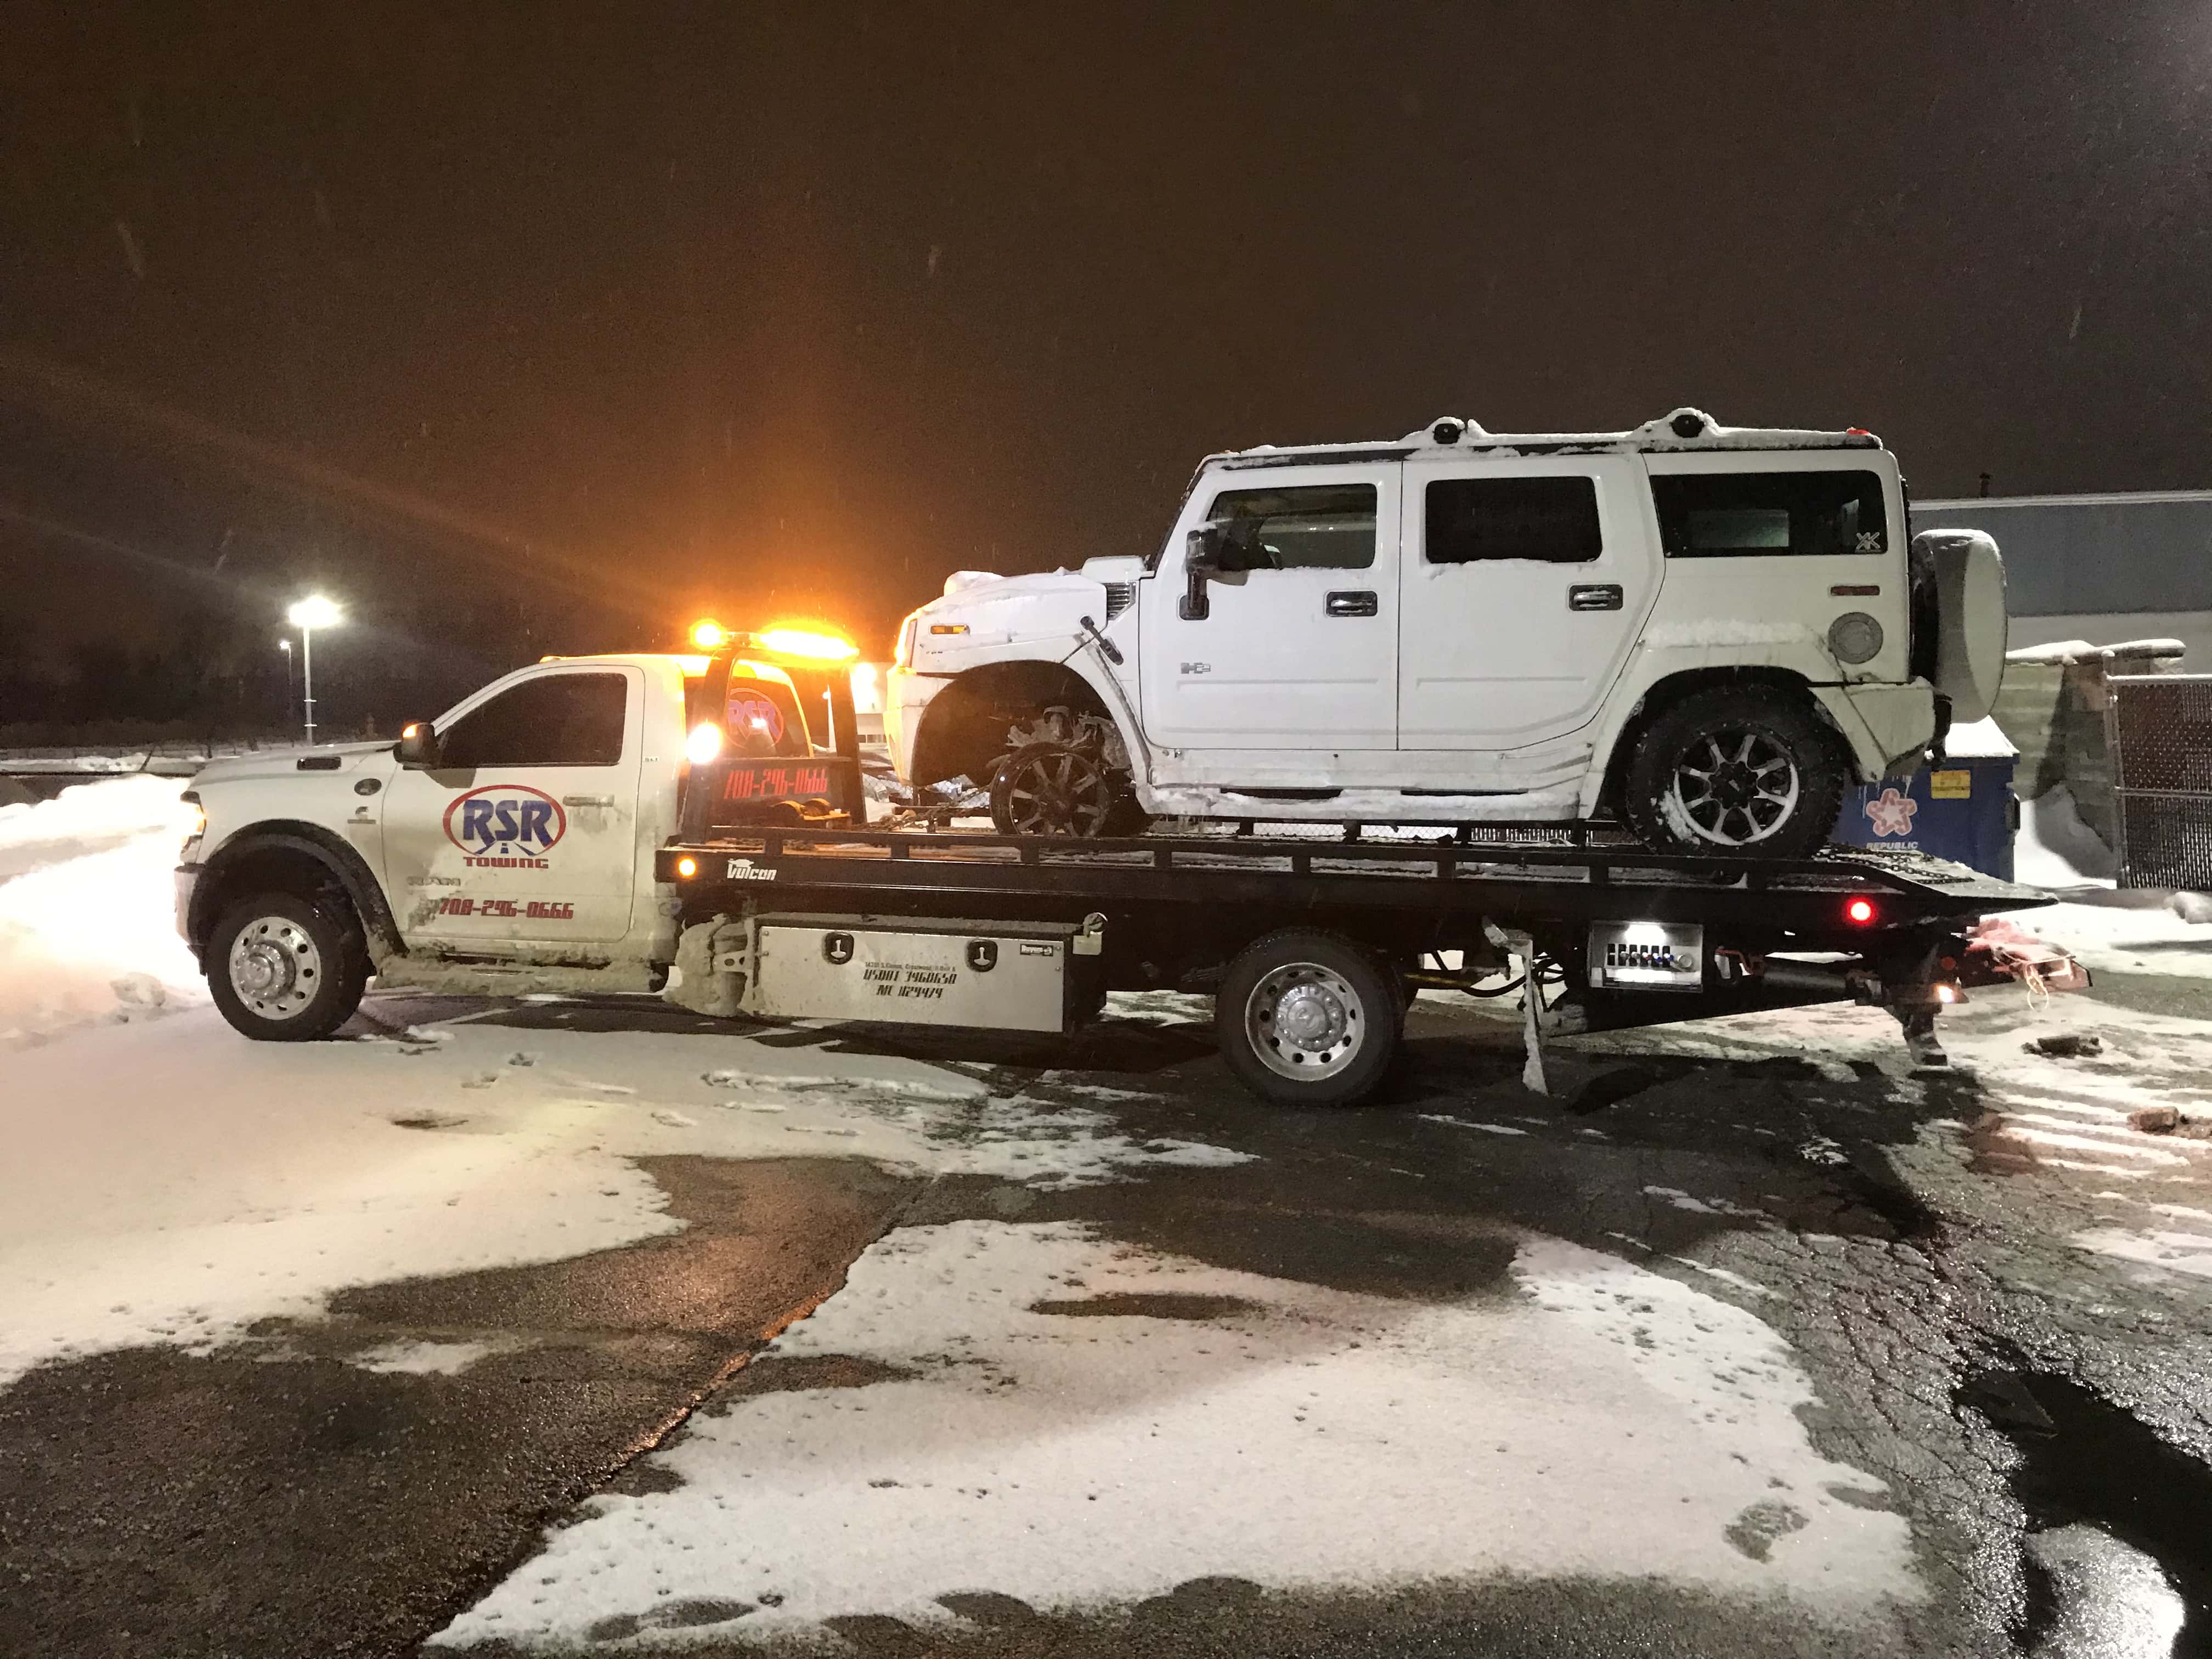 RSR TOWING - Crestwood, IL, US, best tow cars